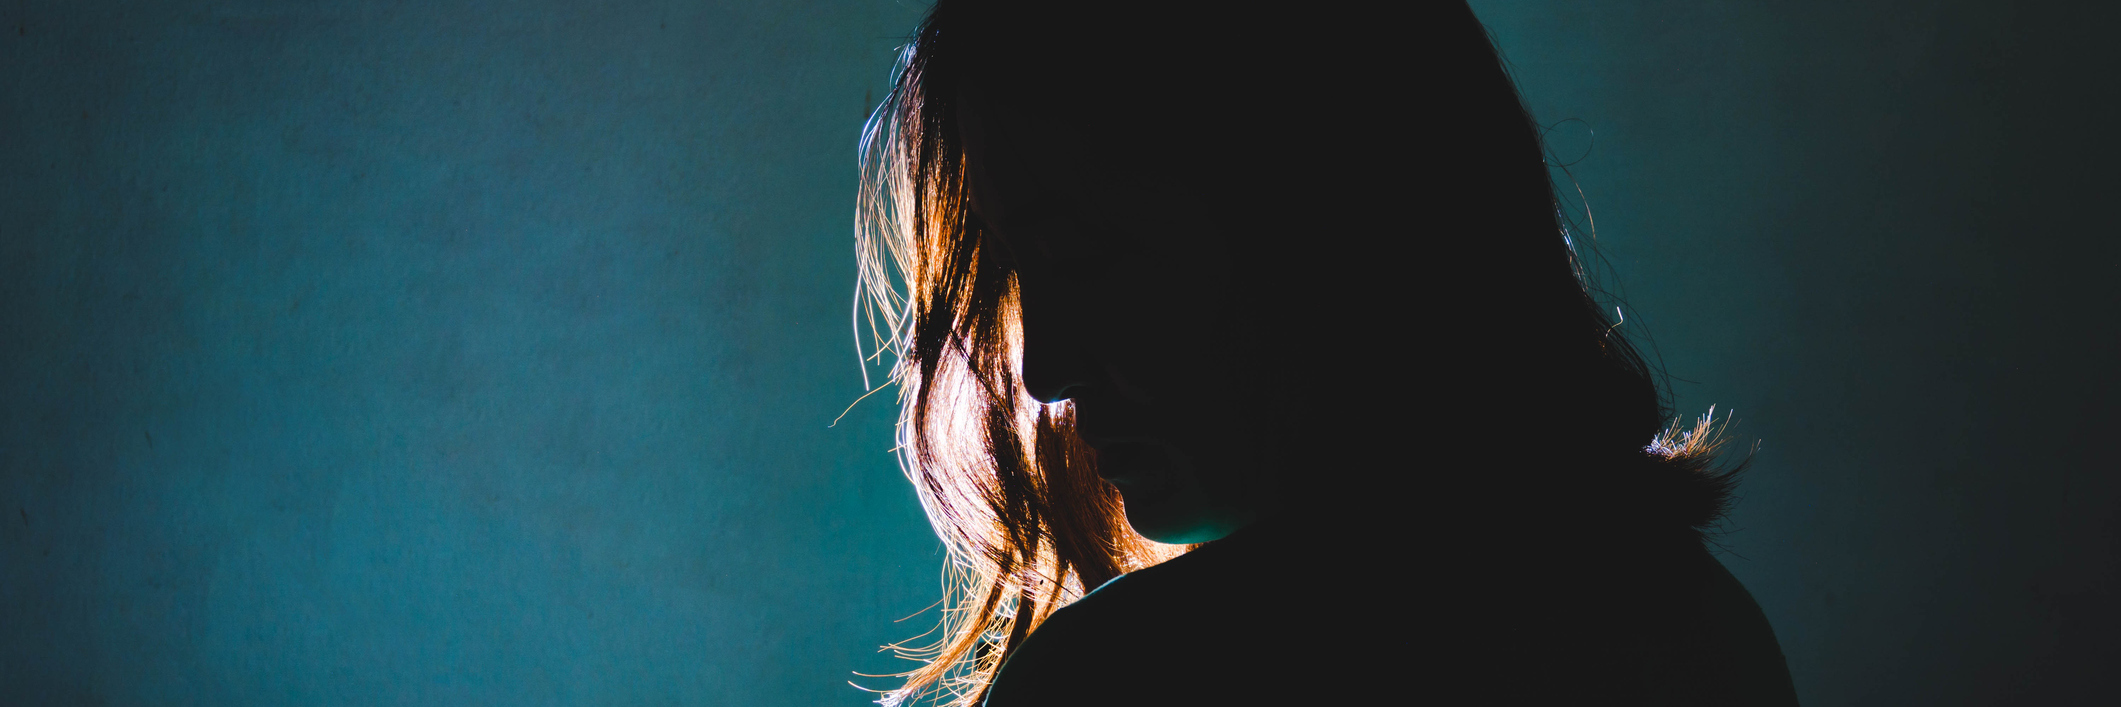 silhouette of woman standing in the dark with light shine behind